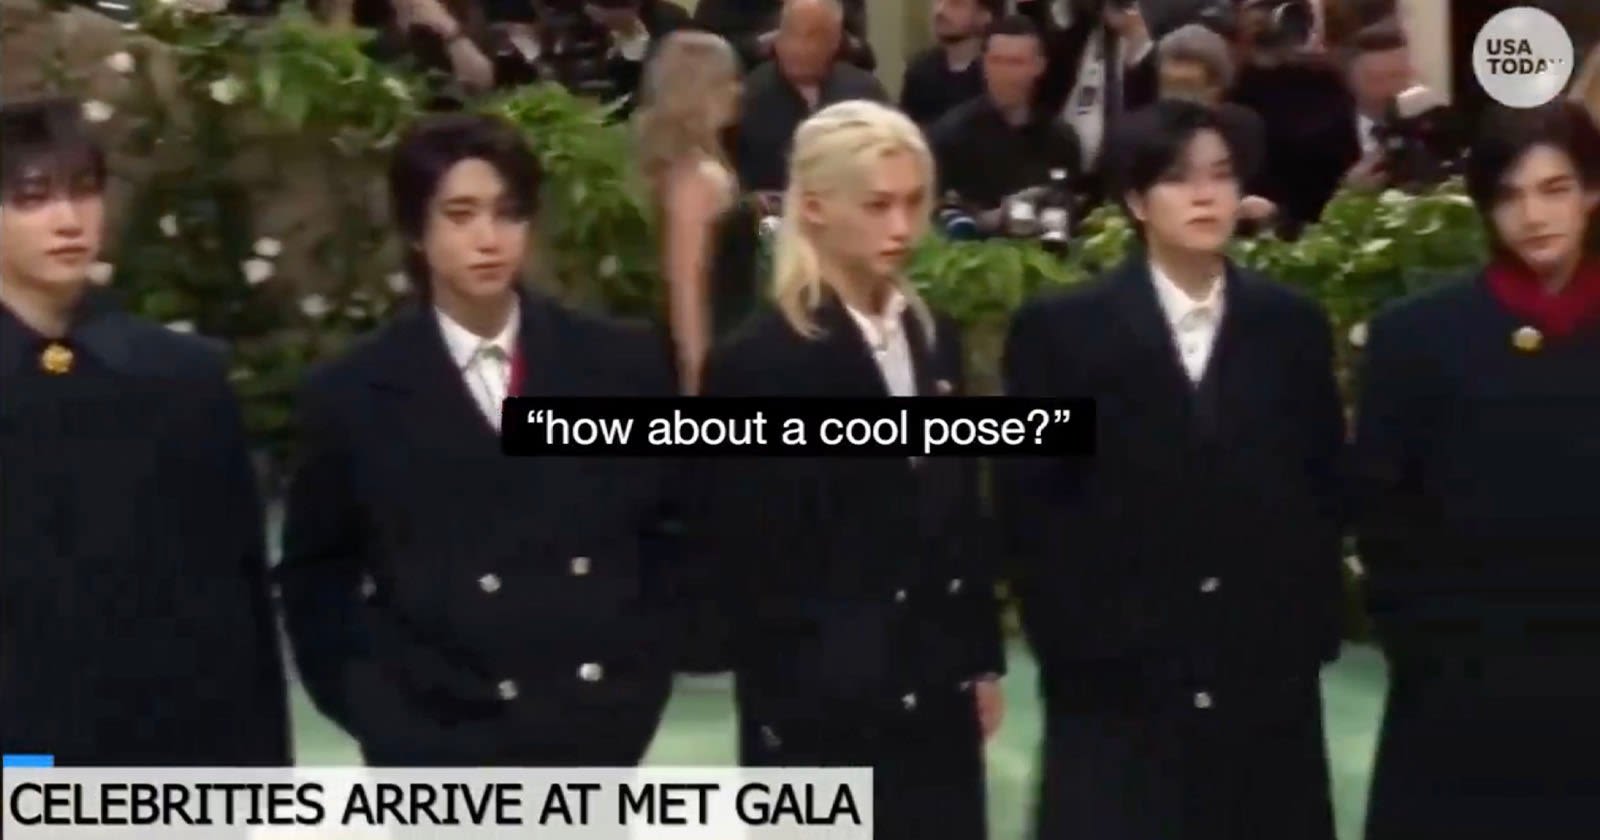 Met Gala Photographers Criticized for 'Racist' Comments About K-Pop Band